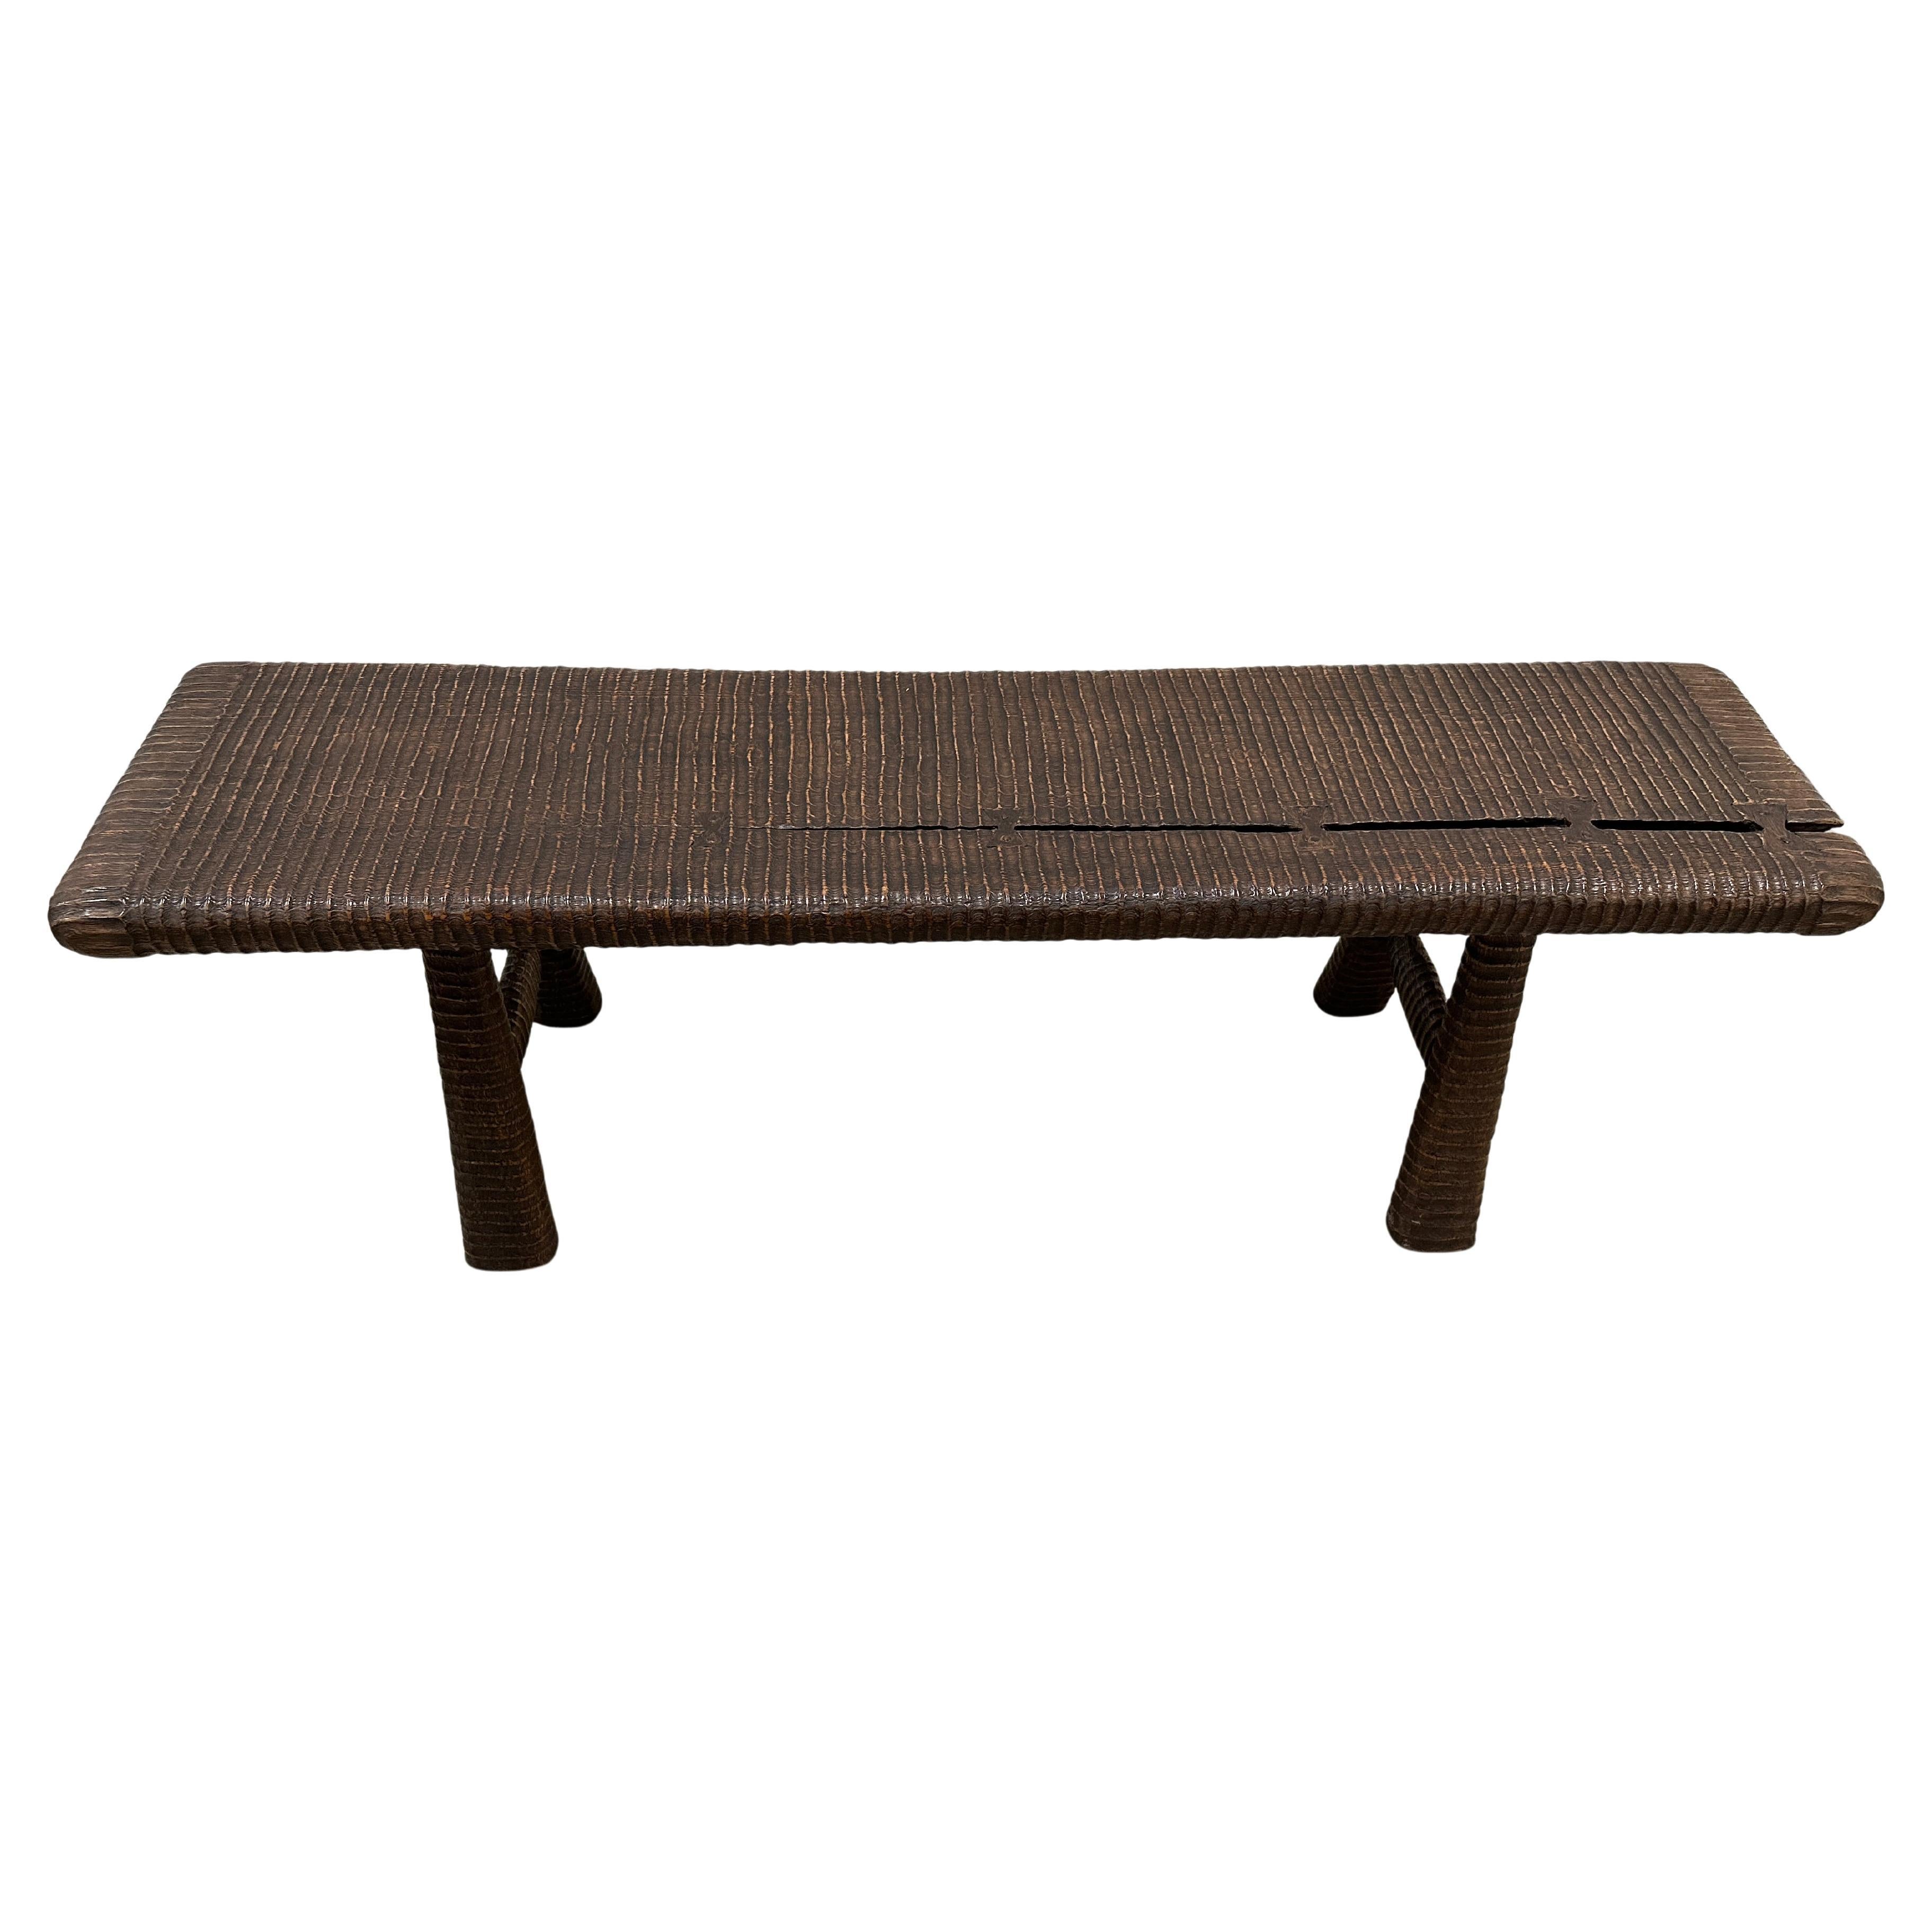 Andrianna Shamaris Impressive Hand Carved Espresso Stained Teak Wood Bench For Sale